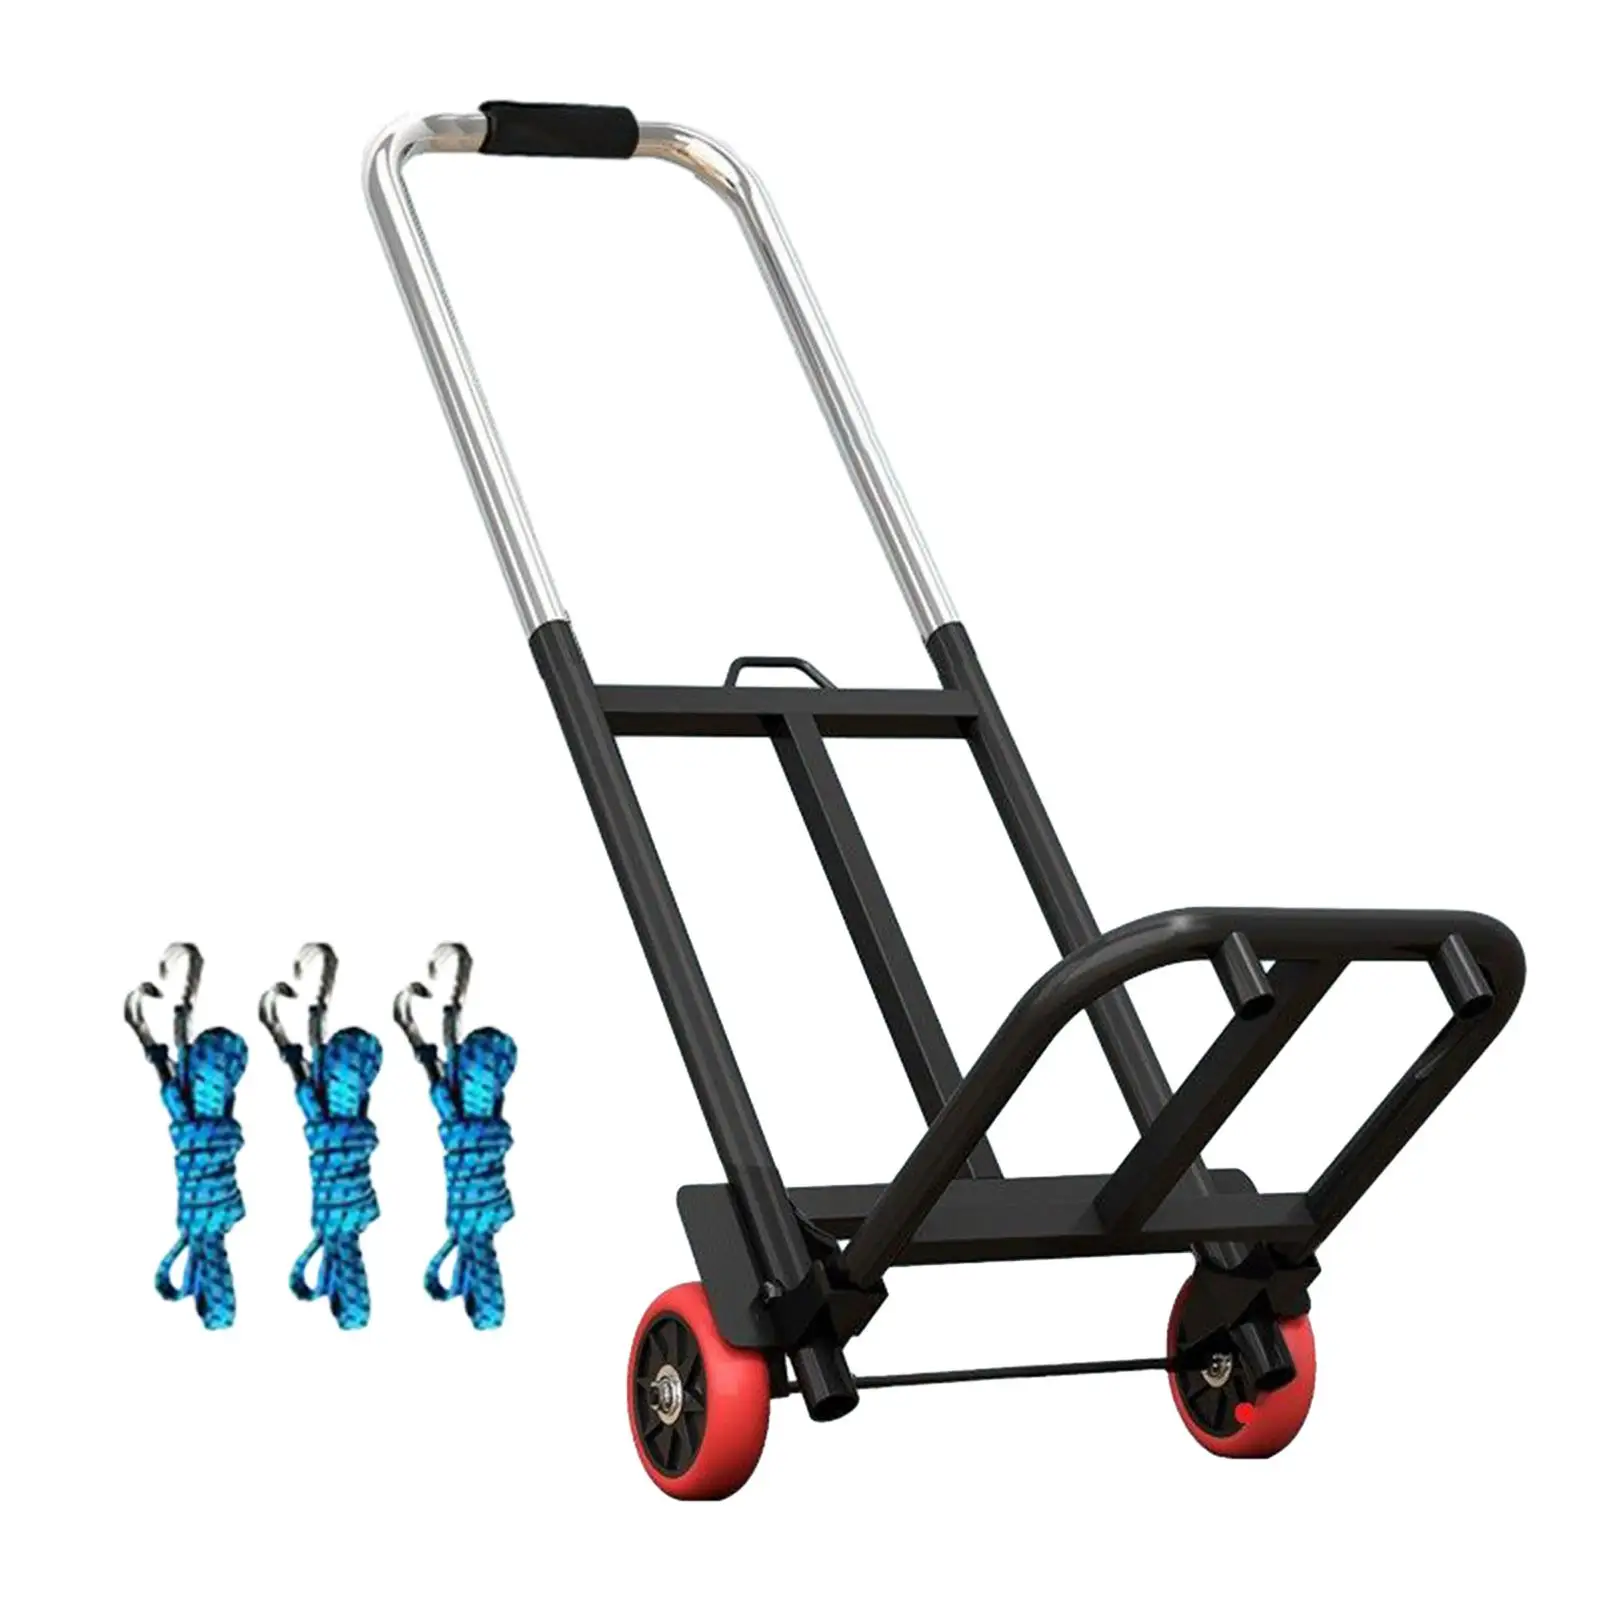 Folding Hand Truck Luggage Trolley Cart Metal Frame for Personal Travel